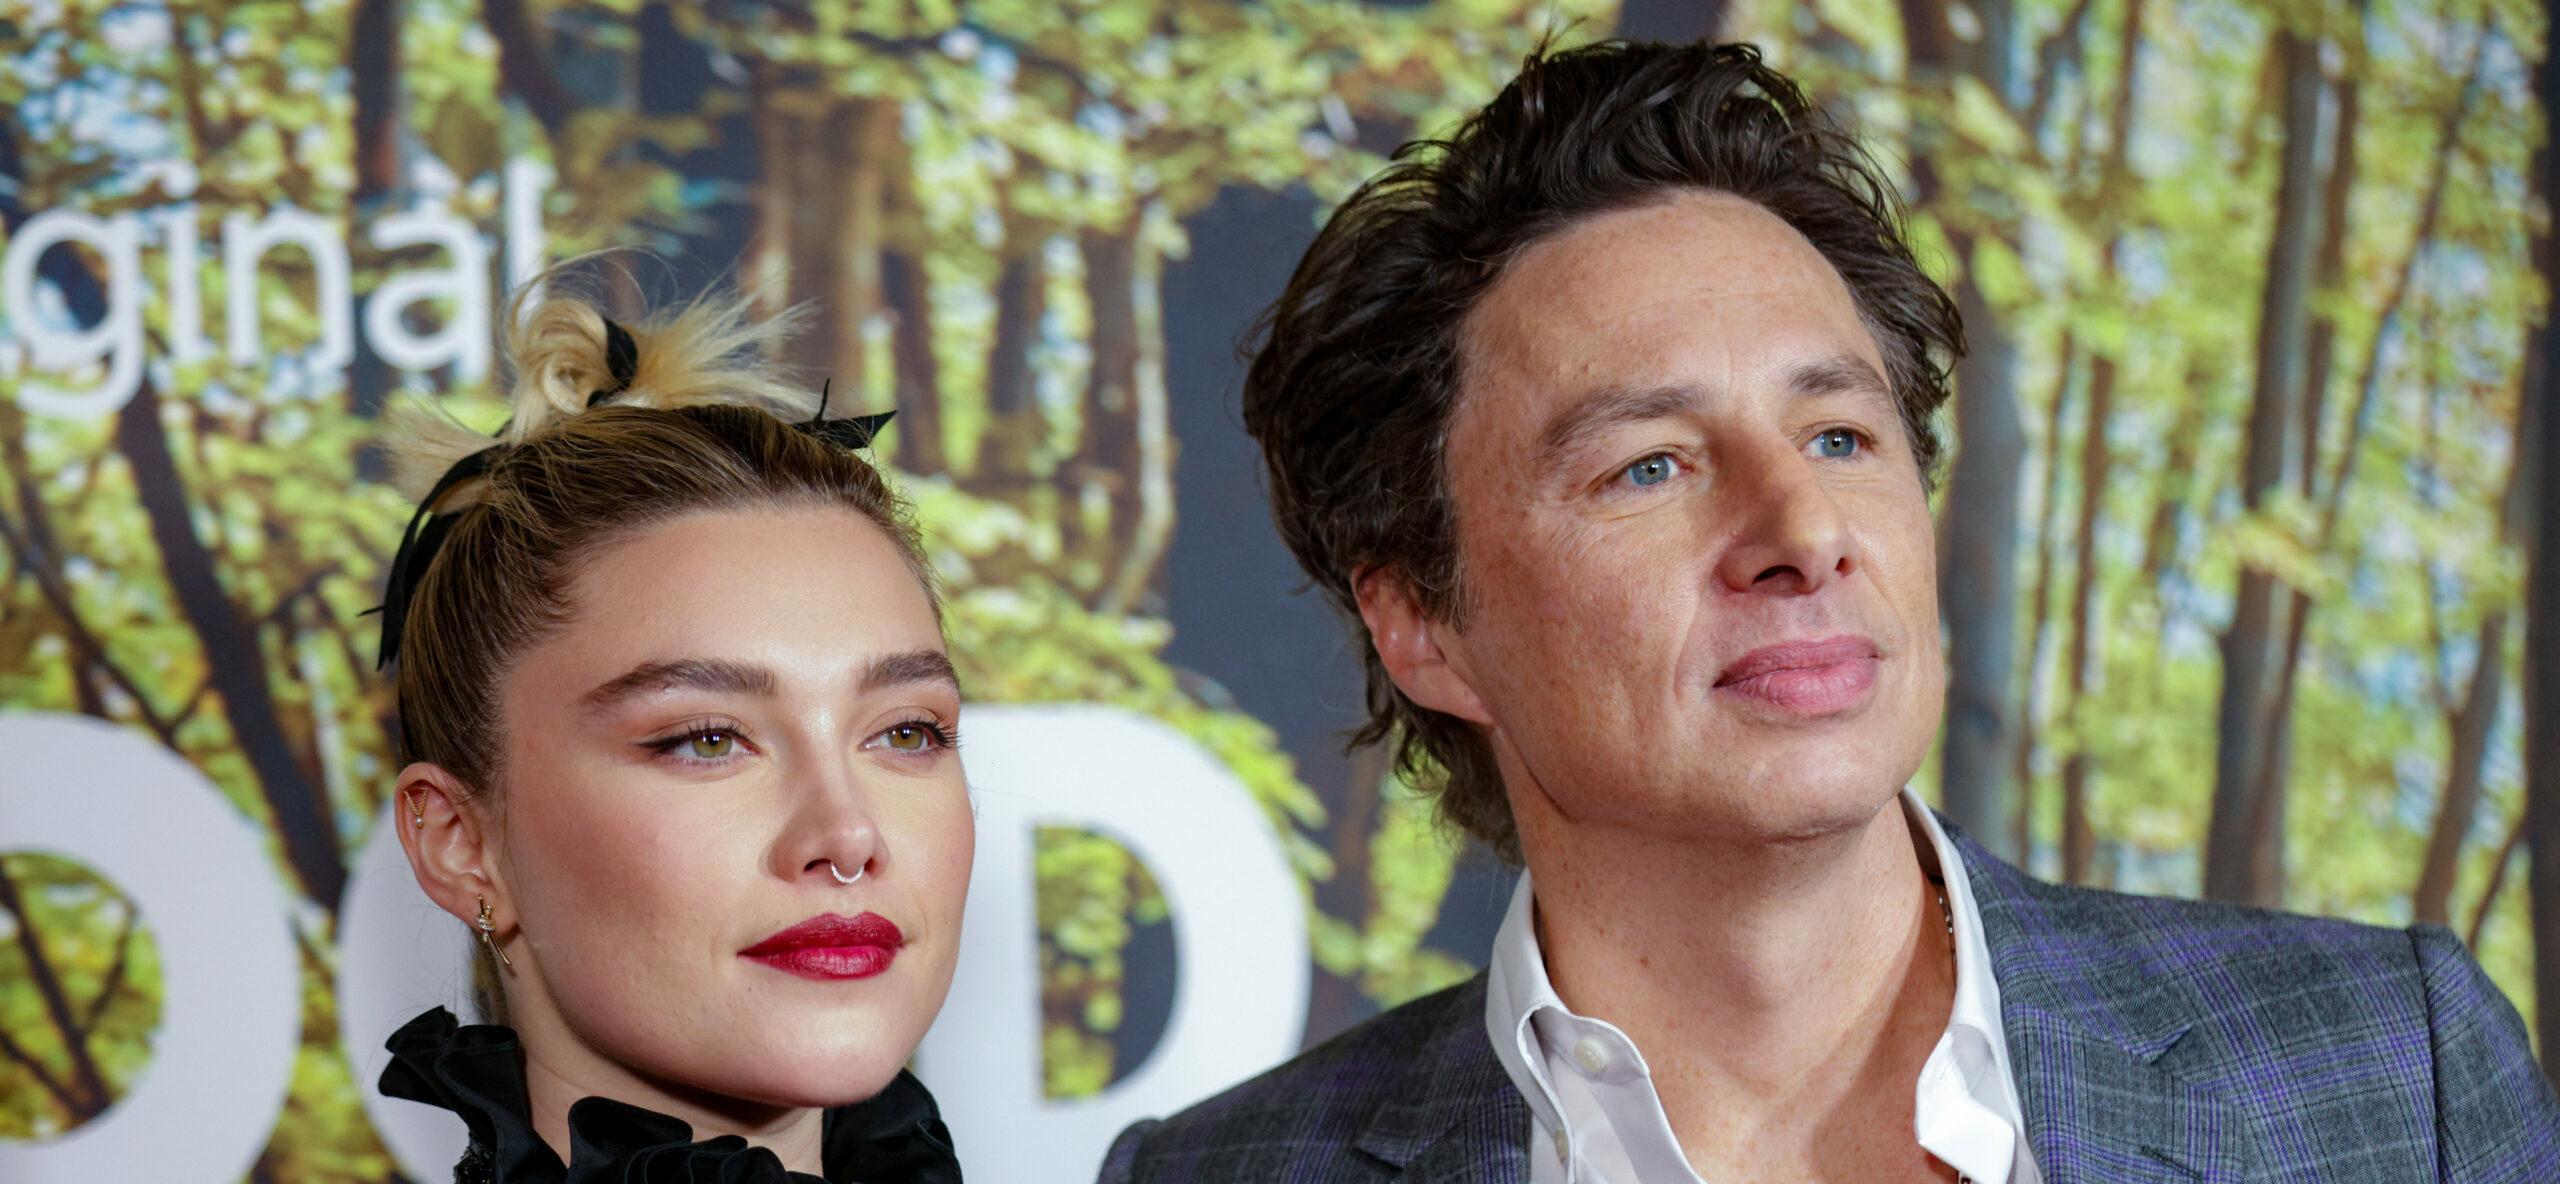 Florence Pugh & Zach Braff Look Cordial In First Joint Red Carpet Appearance Since Split